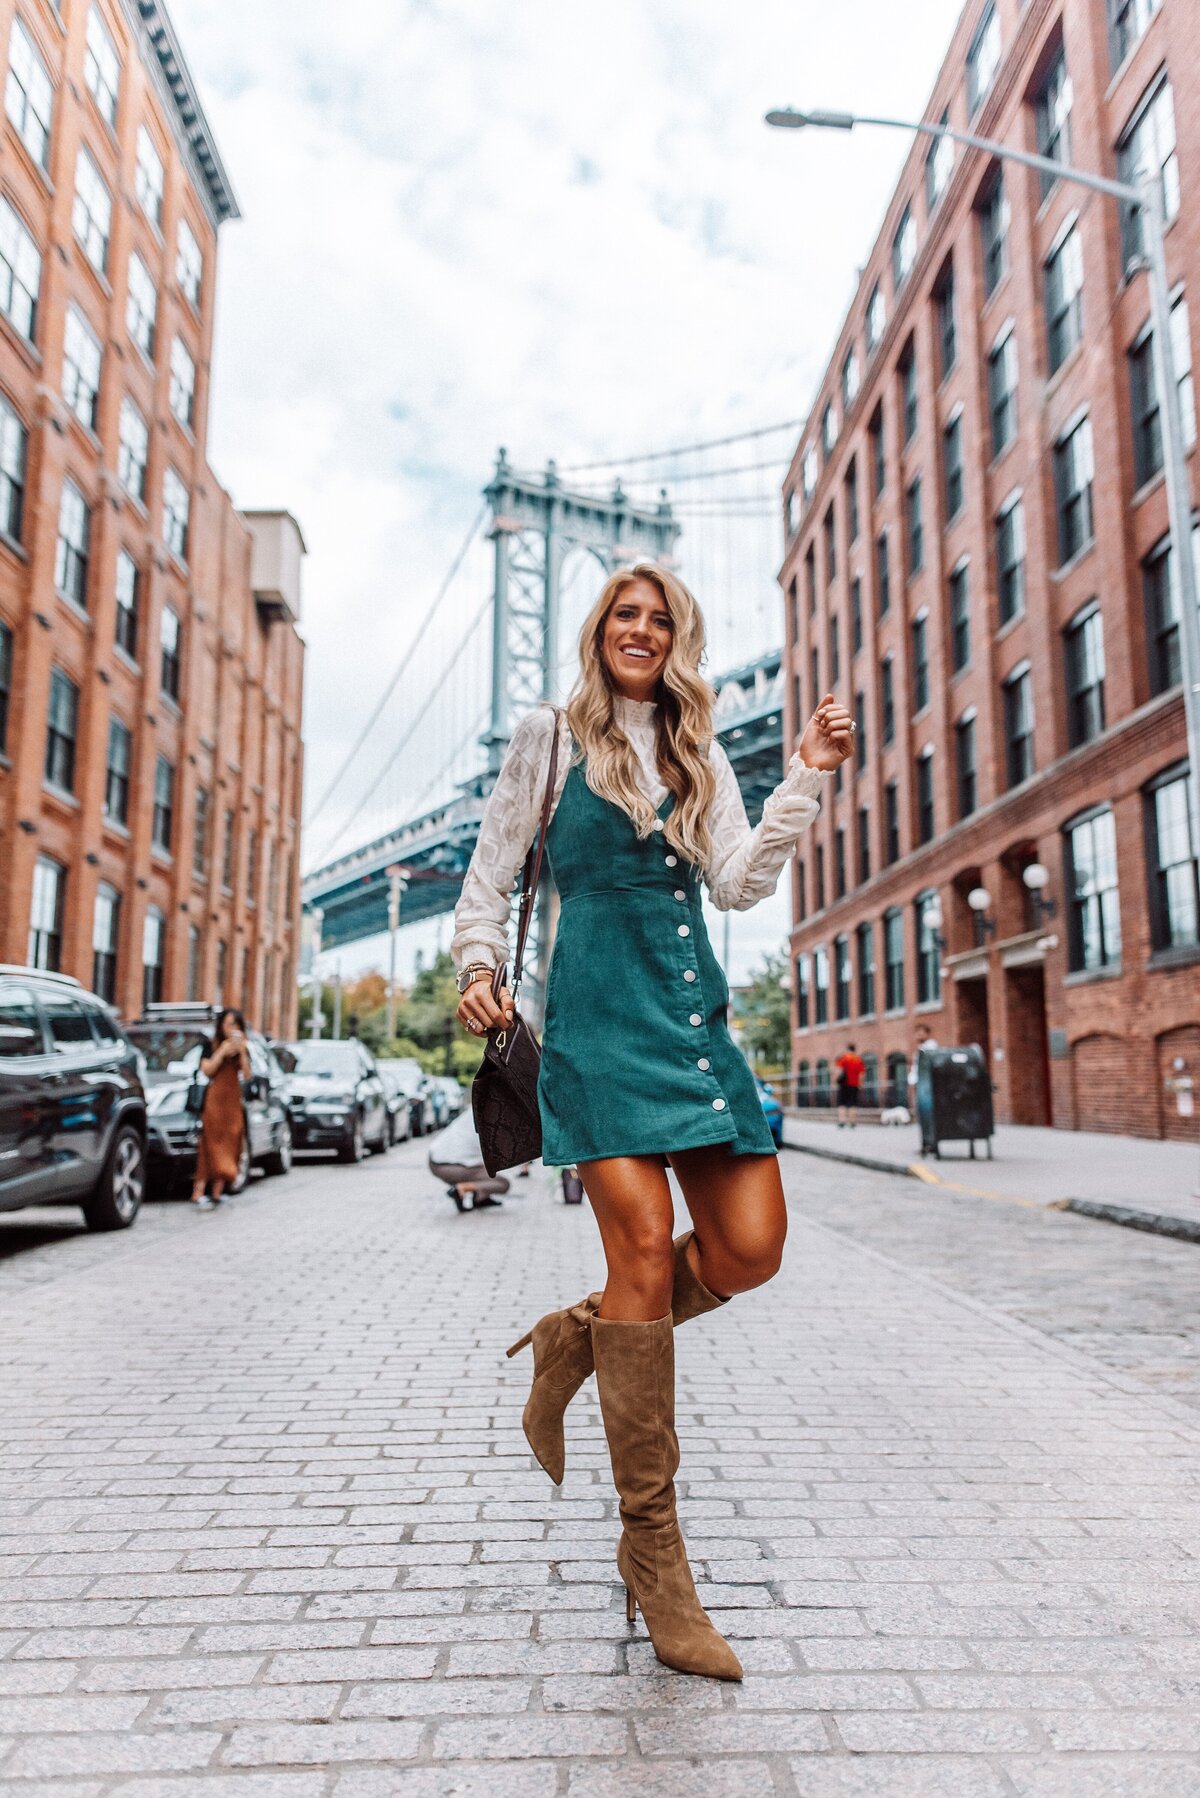 Blonde girl with boots on brick road